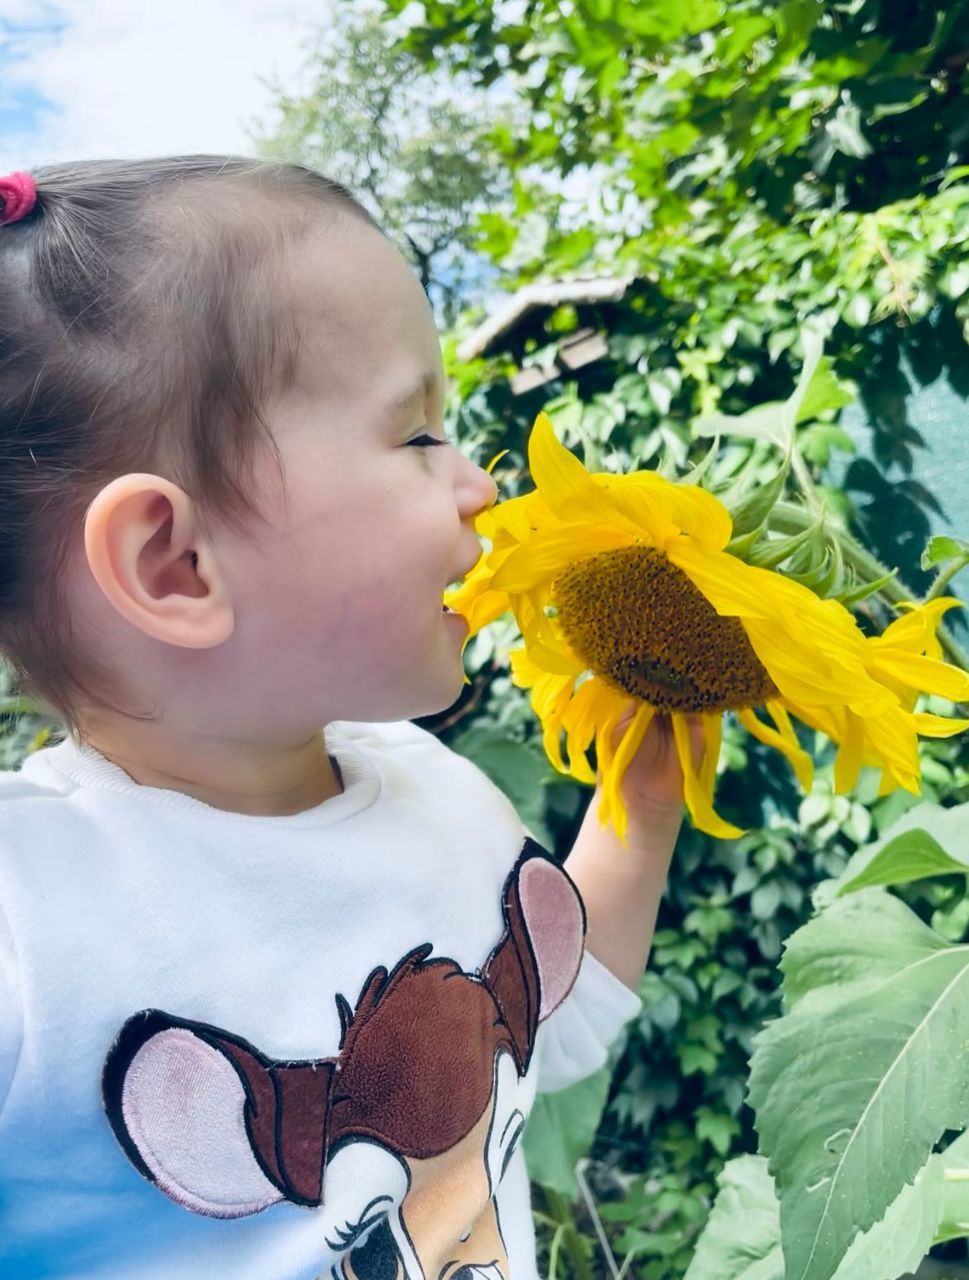 child, childhood, flower, plant, one person, nature, toddler, flowering plant, yellow, baby, sunflower, spring, holding, innocence, freshness, growth, person, day, leisure activity, emotion, beauty in nature, outdoors, women, casual clothing, happiness, cute, lifestyles, smiling, looking, female, portrait, standing, headshot, clothing, fun, leaf, summer, plant part, waist up, flower head